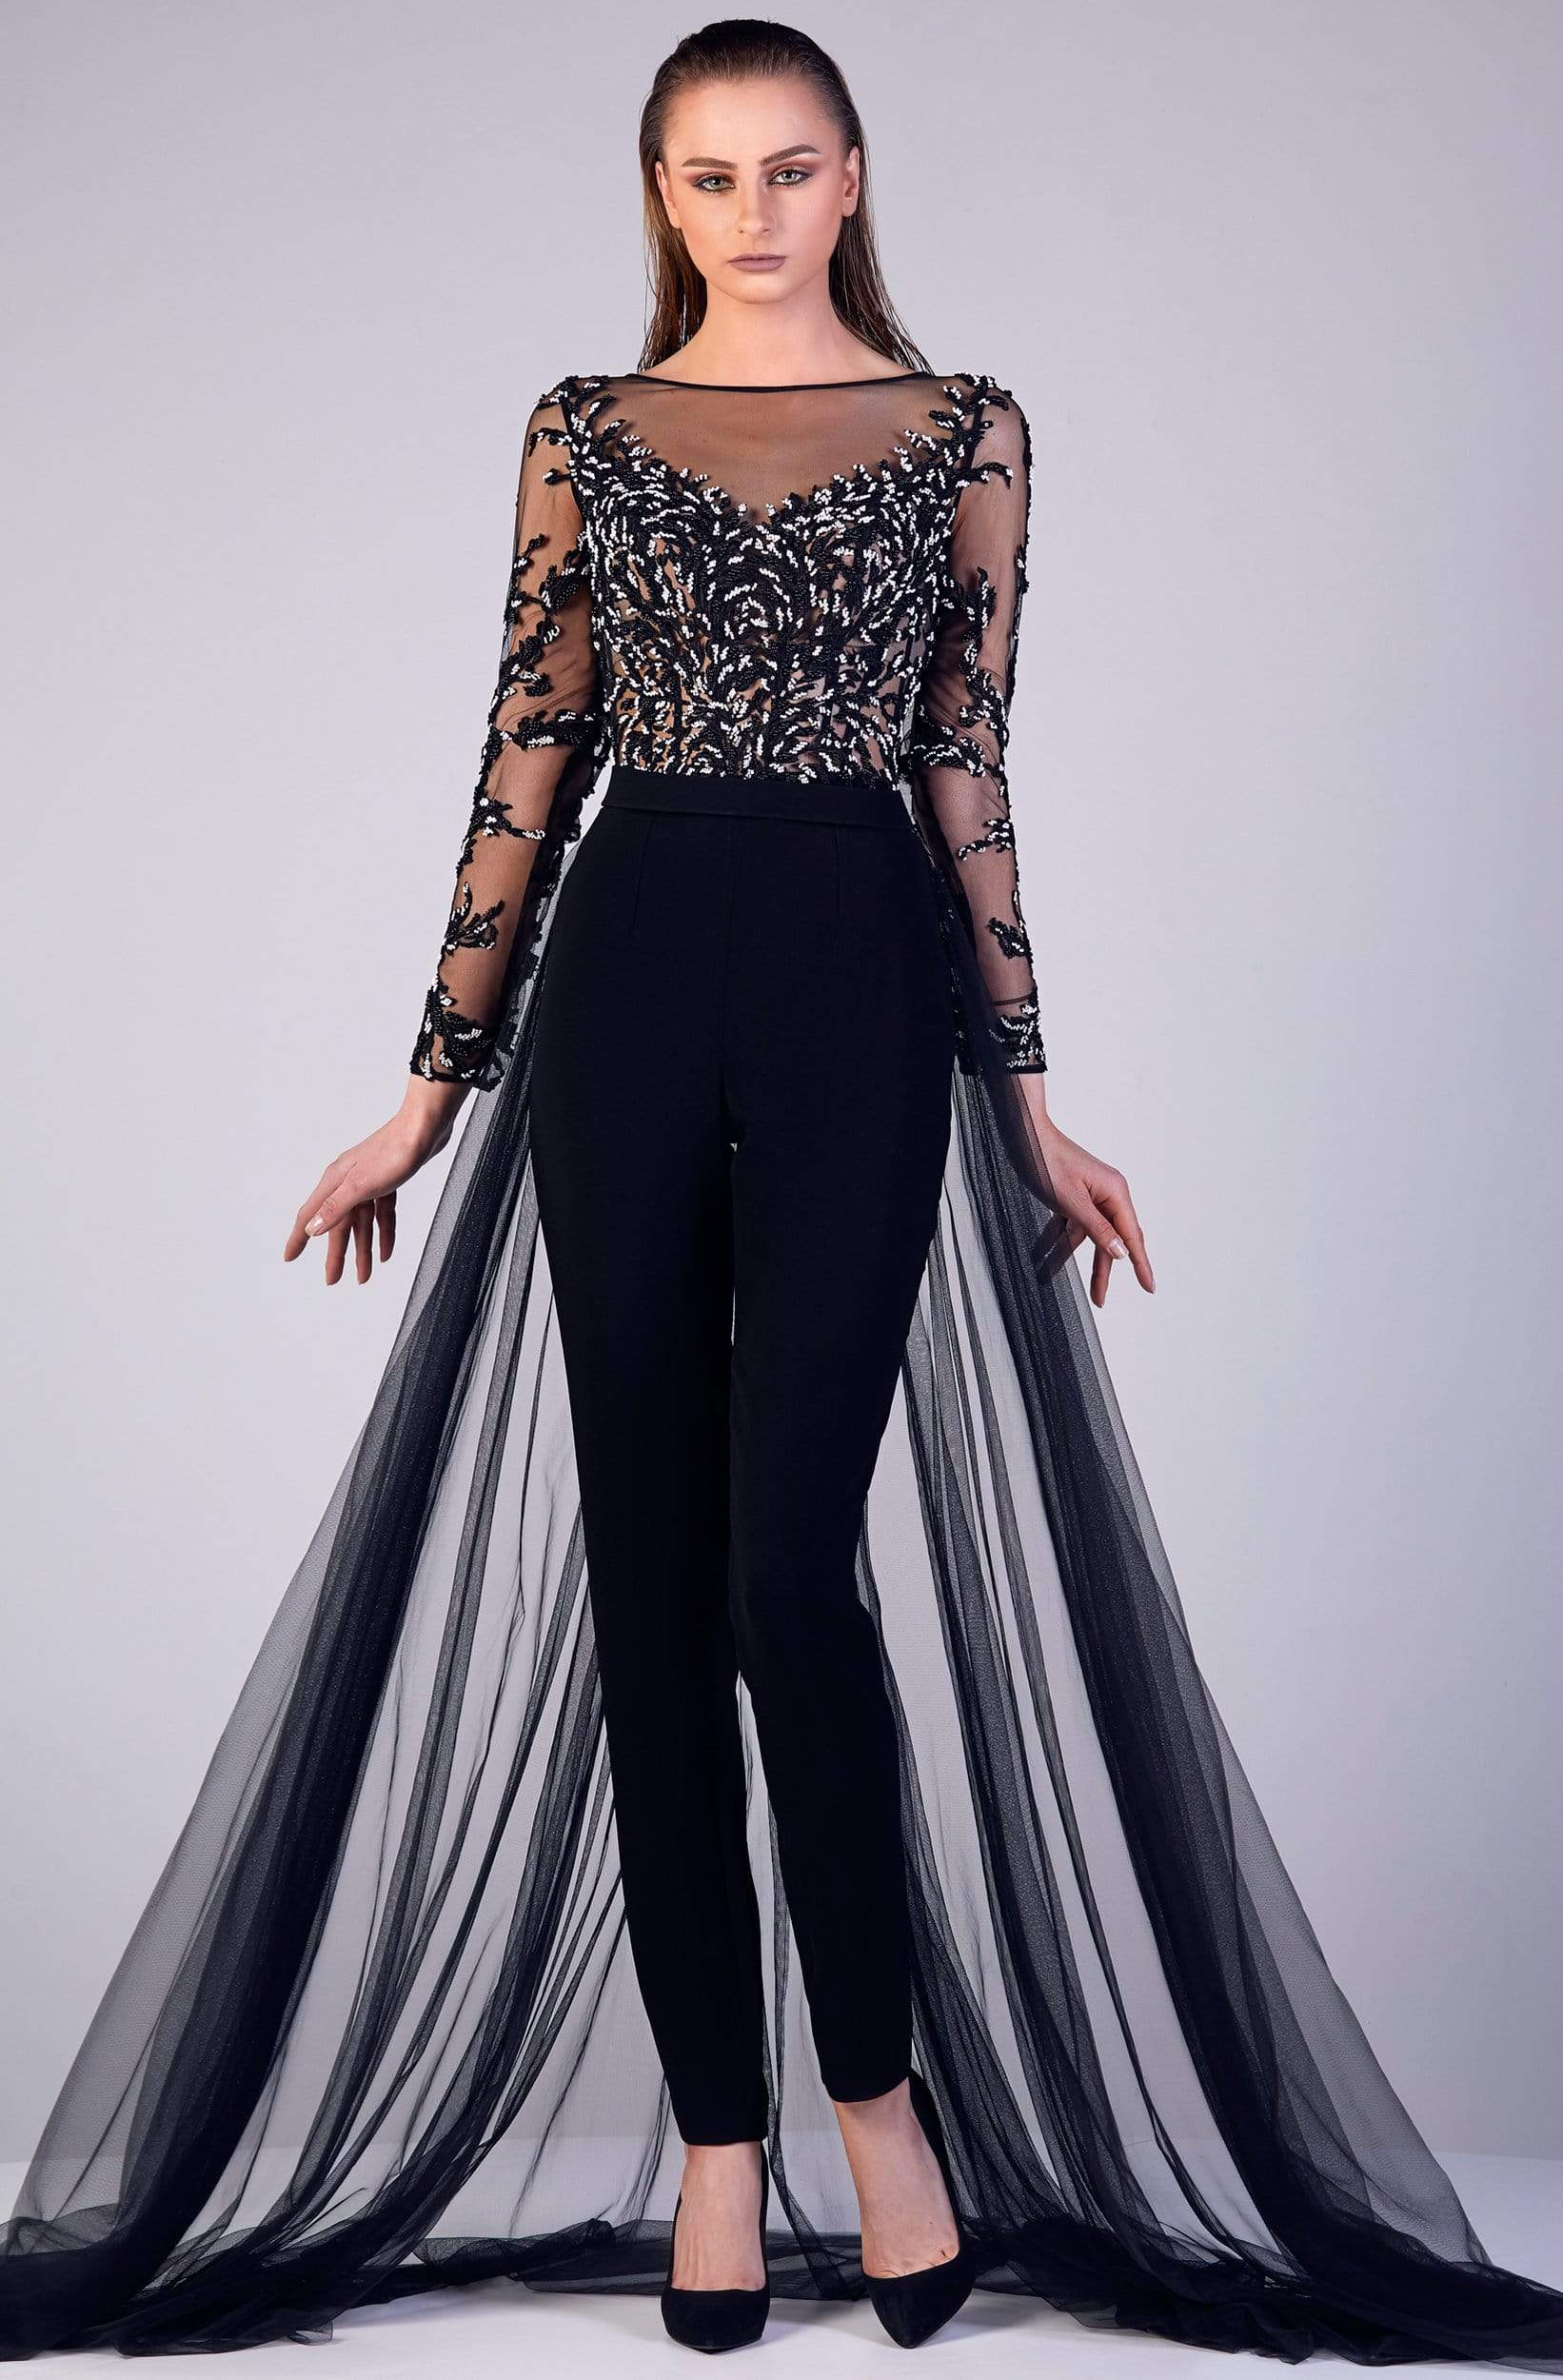 Image of Gatti Nolli Couture - OP-5193 Beaded Illusion Overskirt Jumpsuit